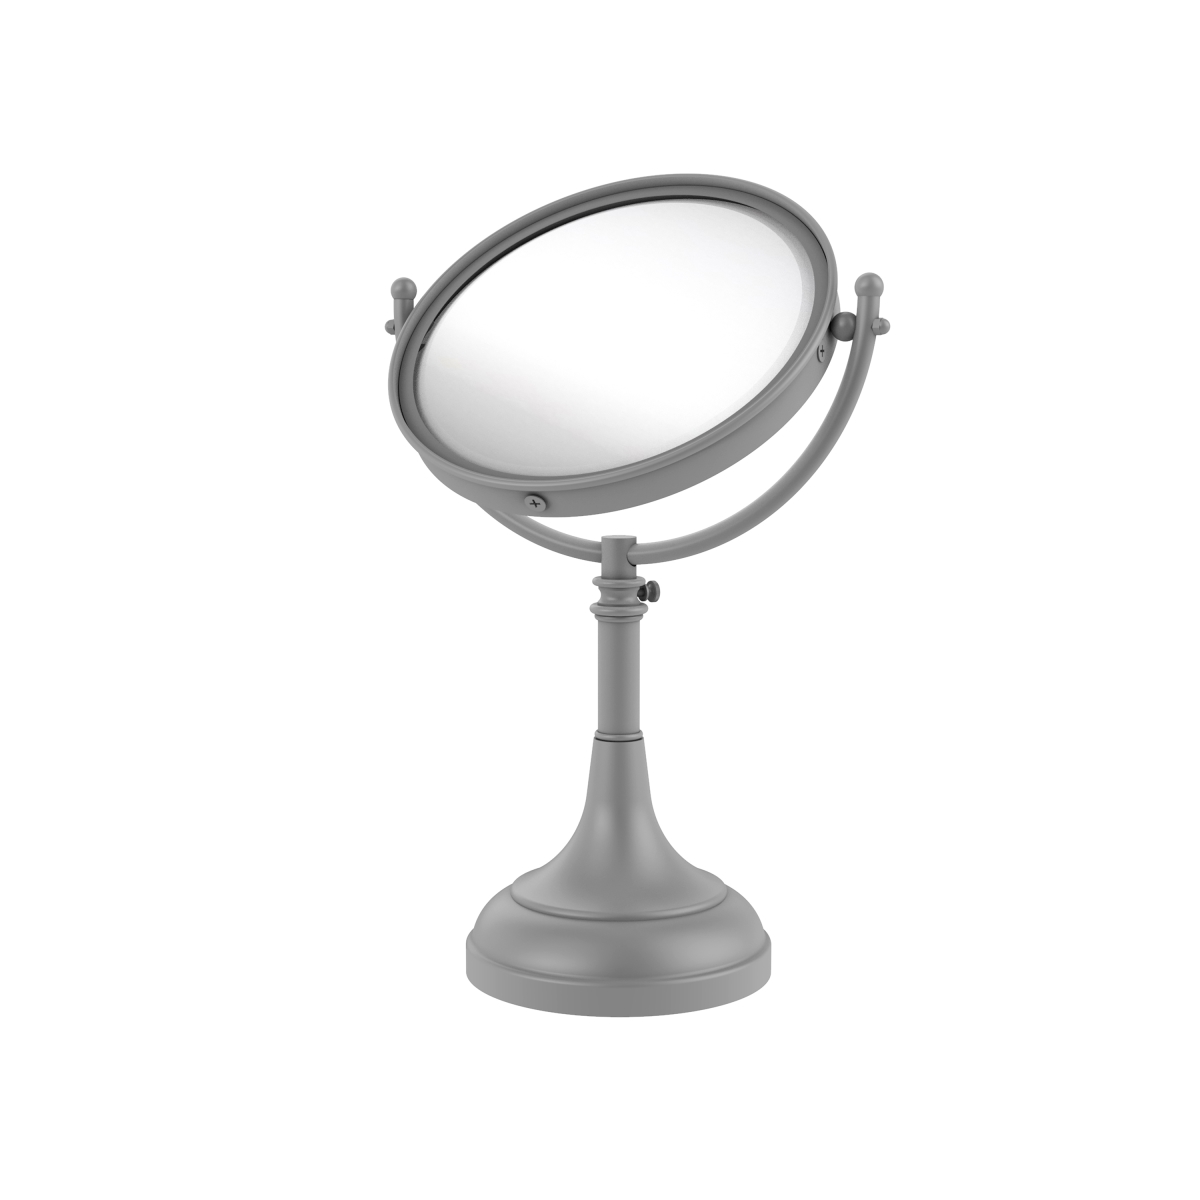 Picture of Allied Brass DM-1-2X-GYM 8 in. Height Adjustable Vanity Top Make-Up Mirror 2X Magnification, Matte Gray